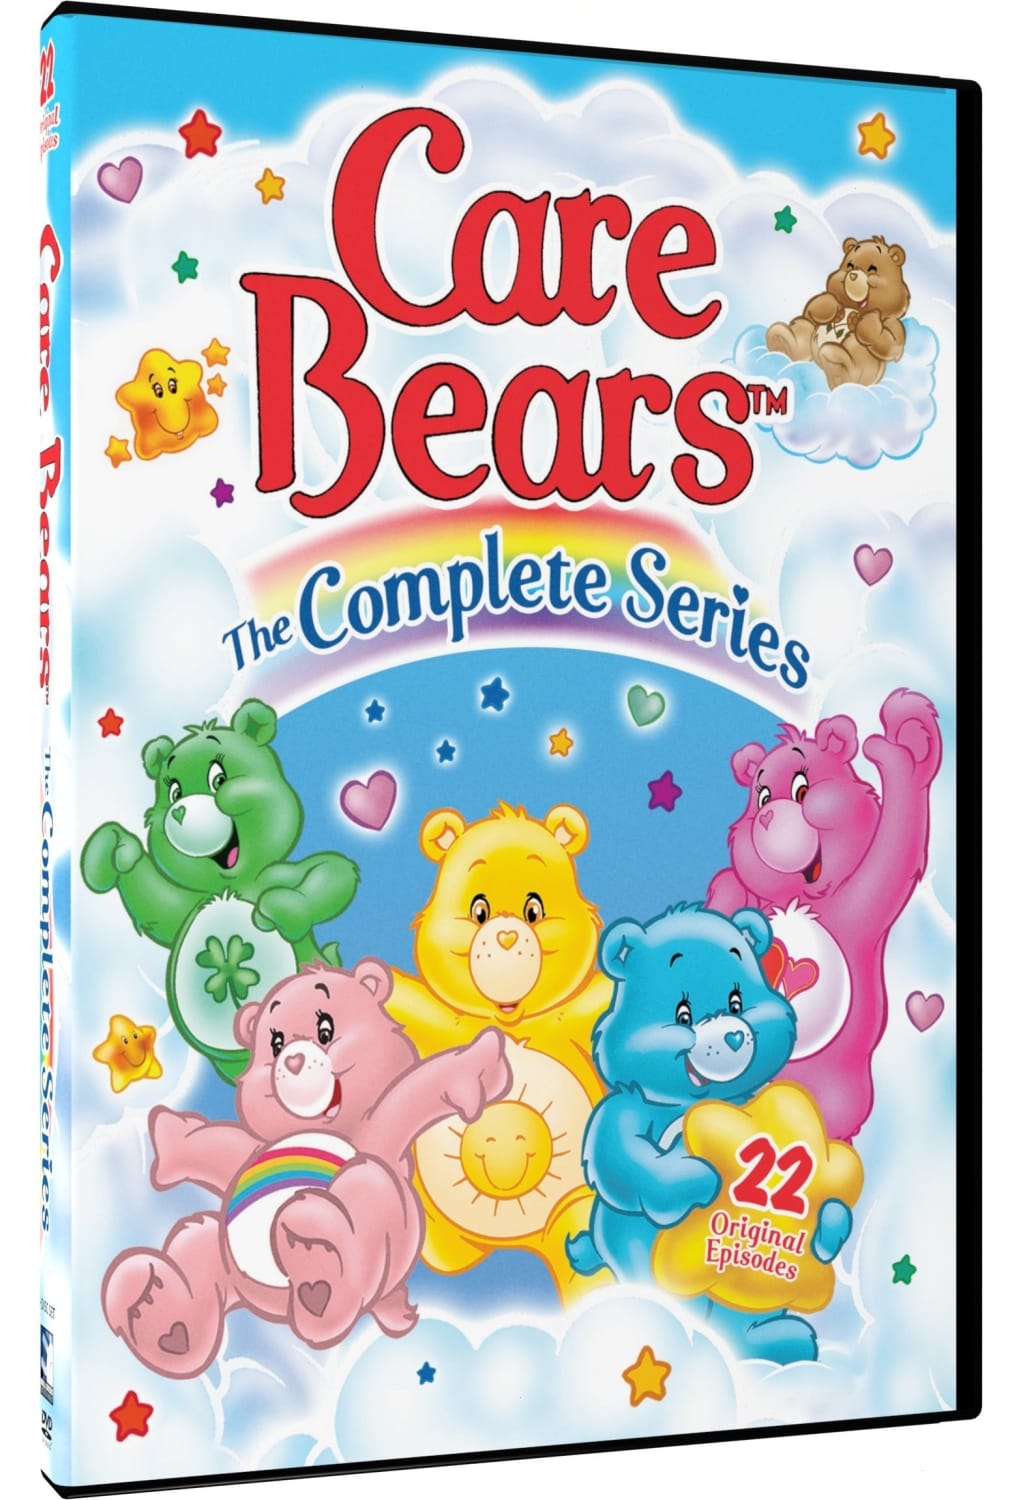 Care Bears: The Complete Series (DVD) on MovieShack